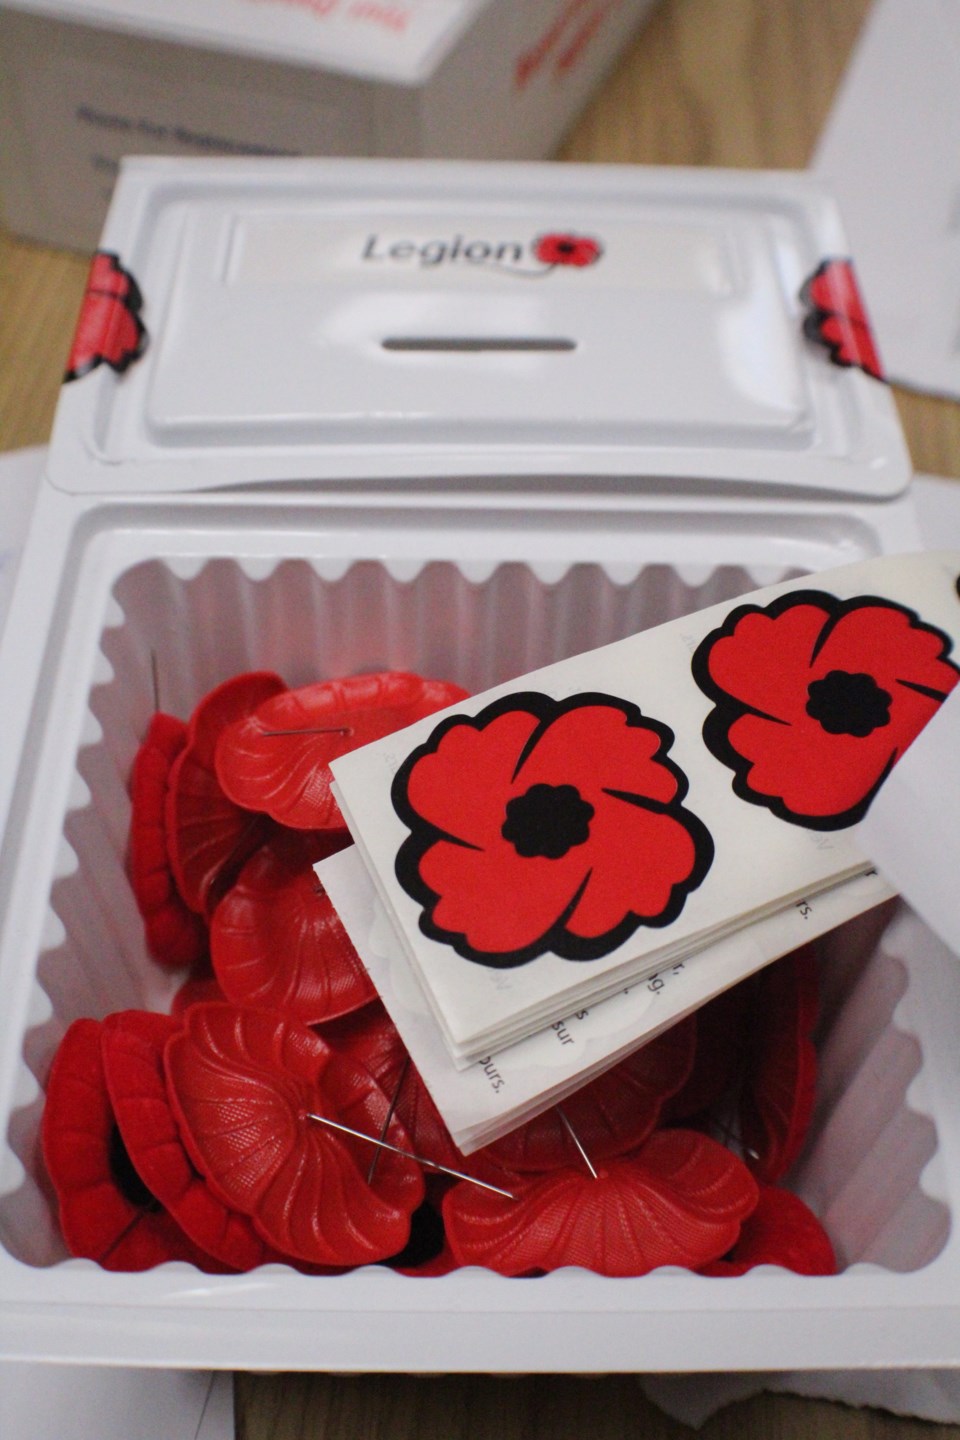 2018-10-29 Poppy campaign 5 RB